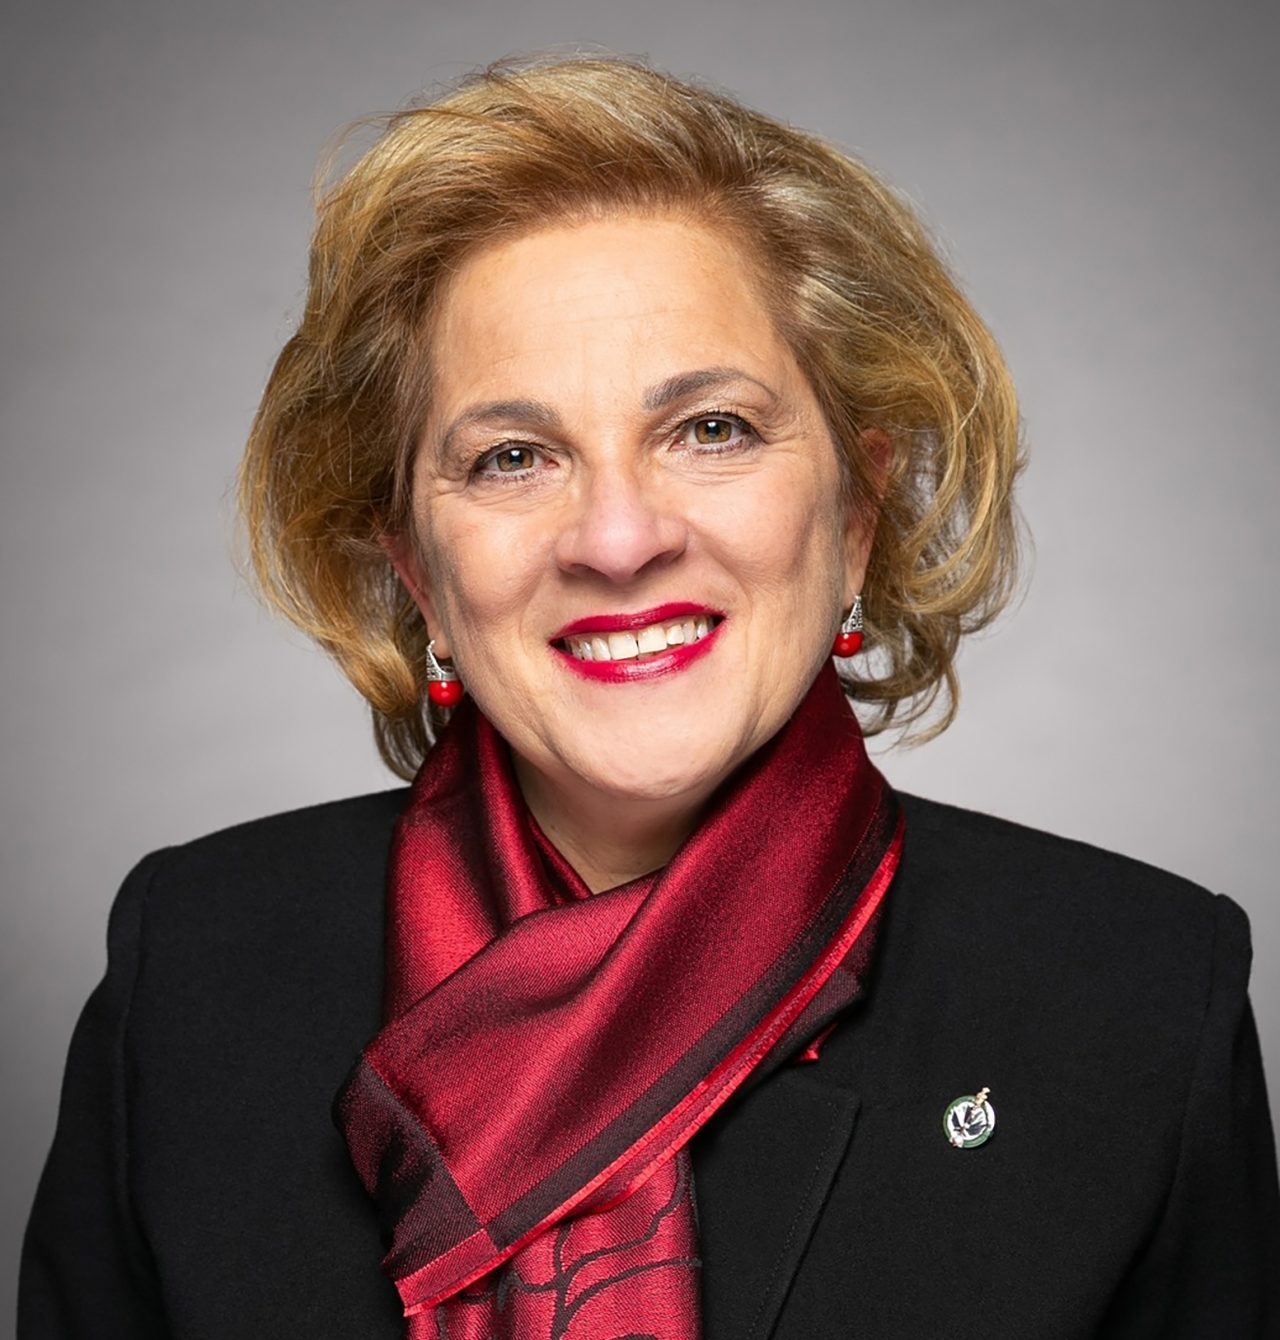 A portrait of a light-skinned woman with short sandy blond hair; she smiles at the camera. She is wearing a red scarf tied at the neck, and matching red lipstick and earrings. Her blazer is black with a silver lapel pin.